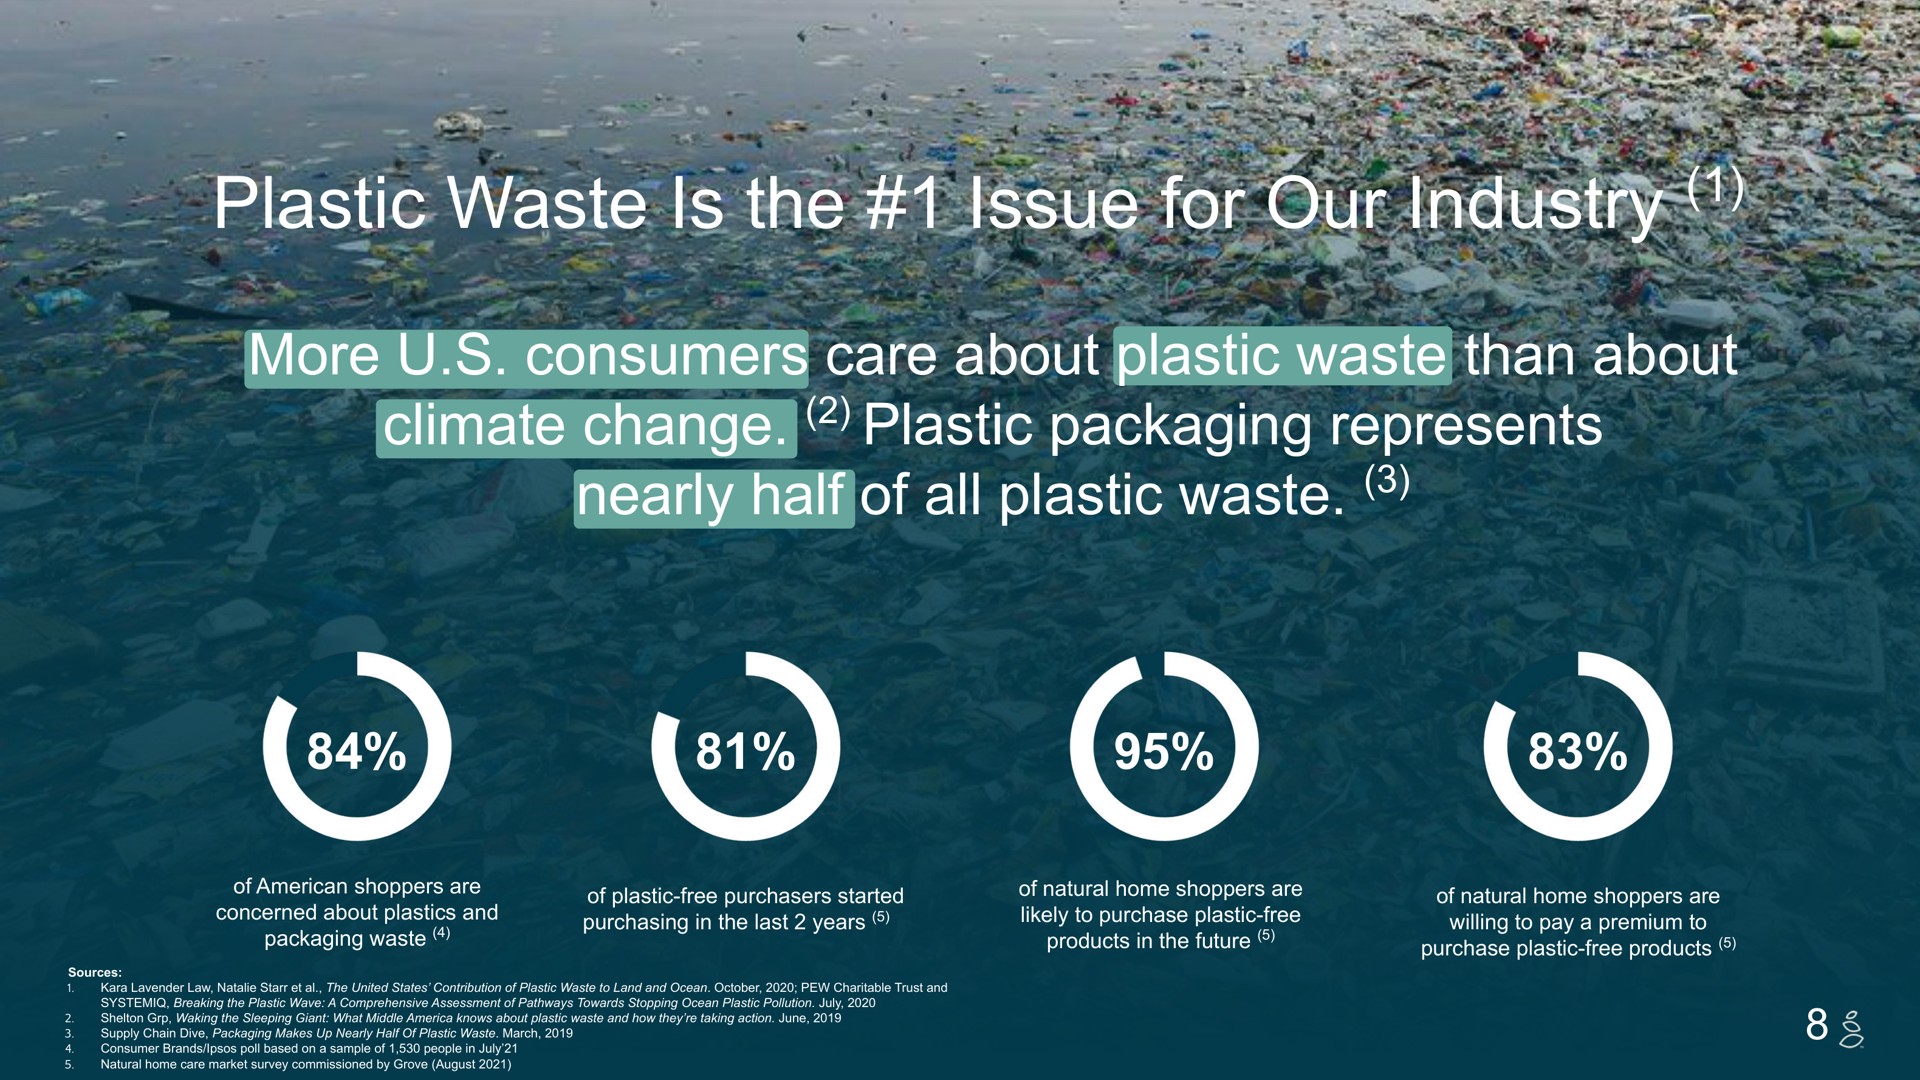 plastic waste is the issue for our industry more consumers care about plastic waste than about climate change plastic packaging represents nearly half of all plastic waste a are mel | Grove